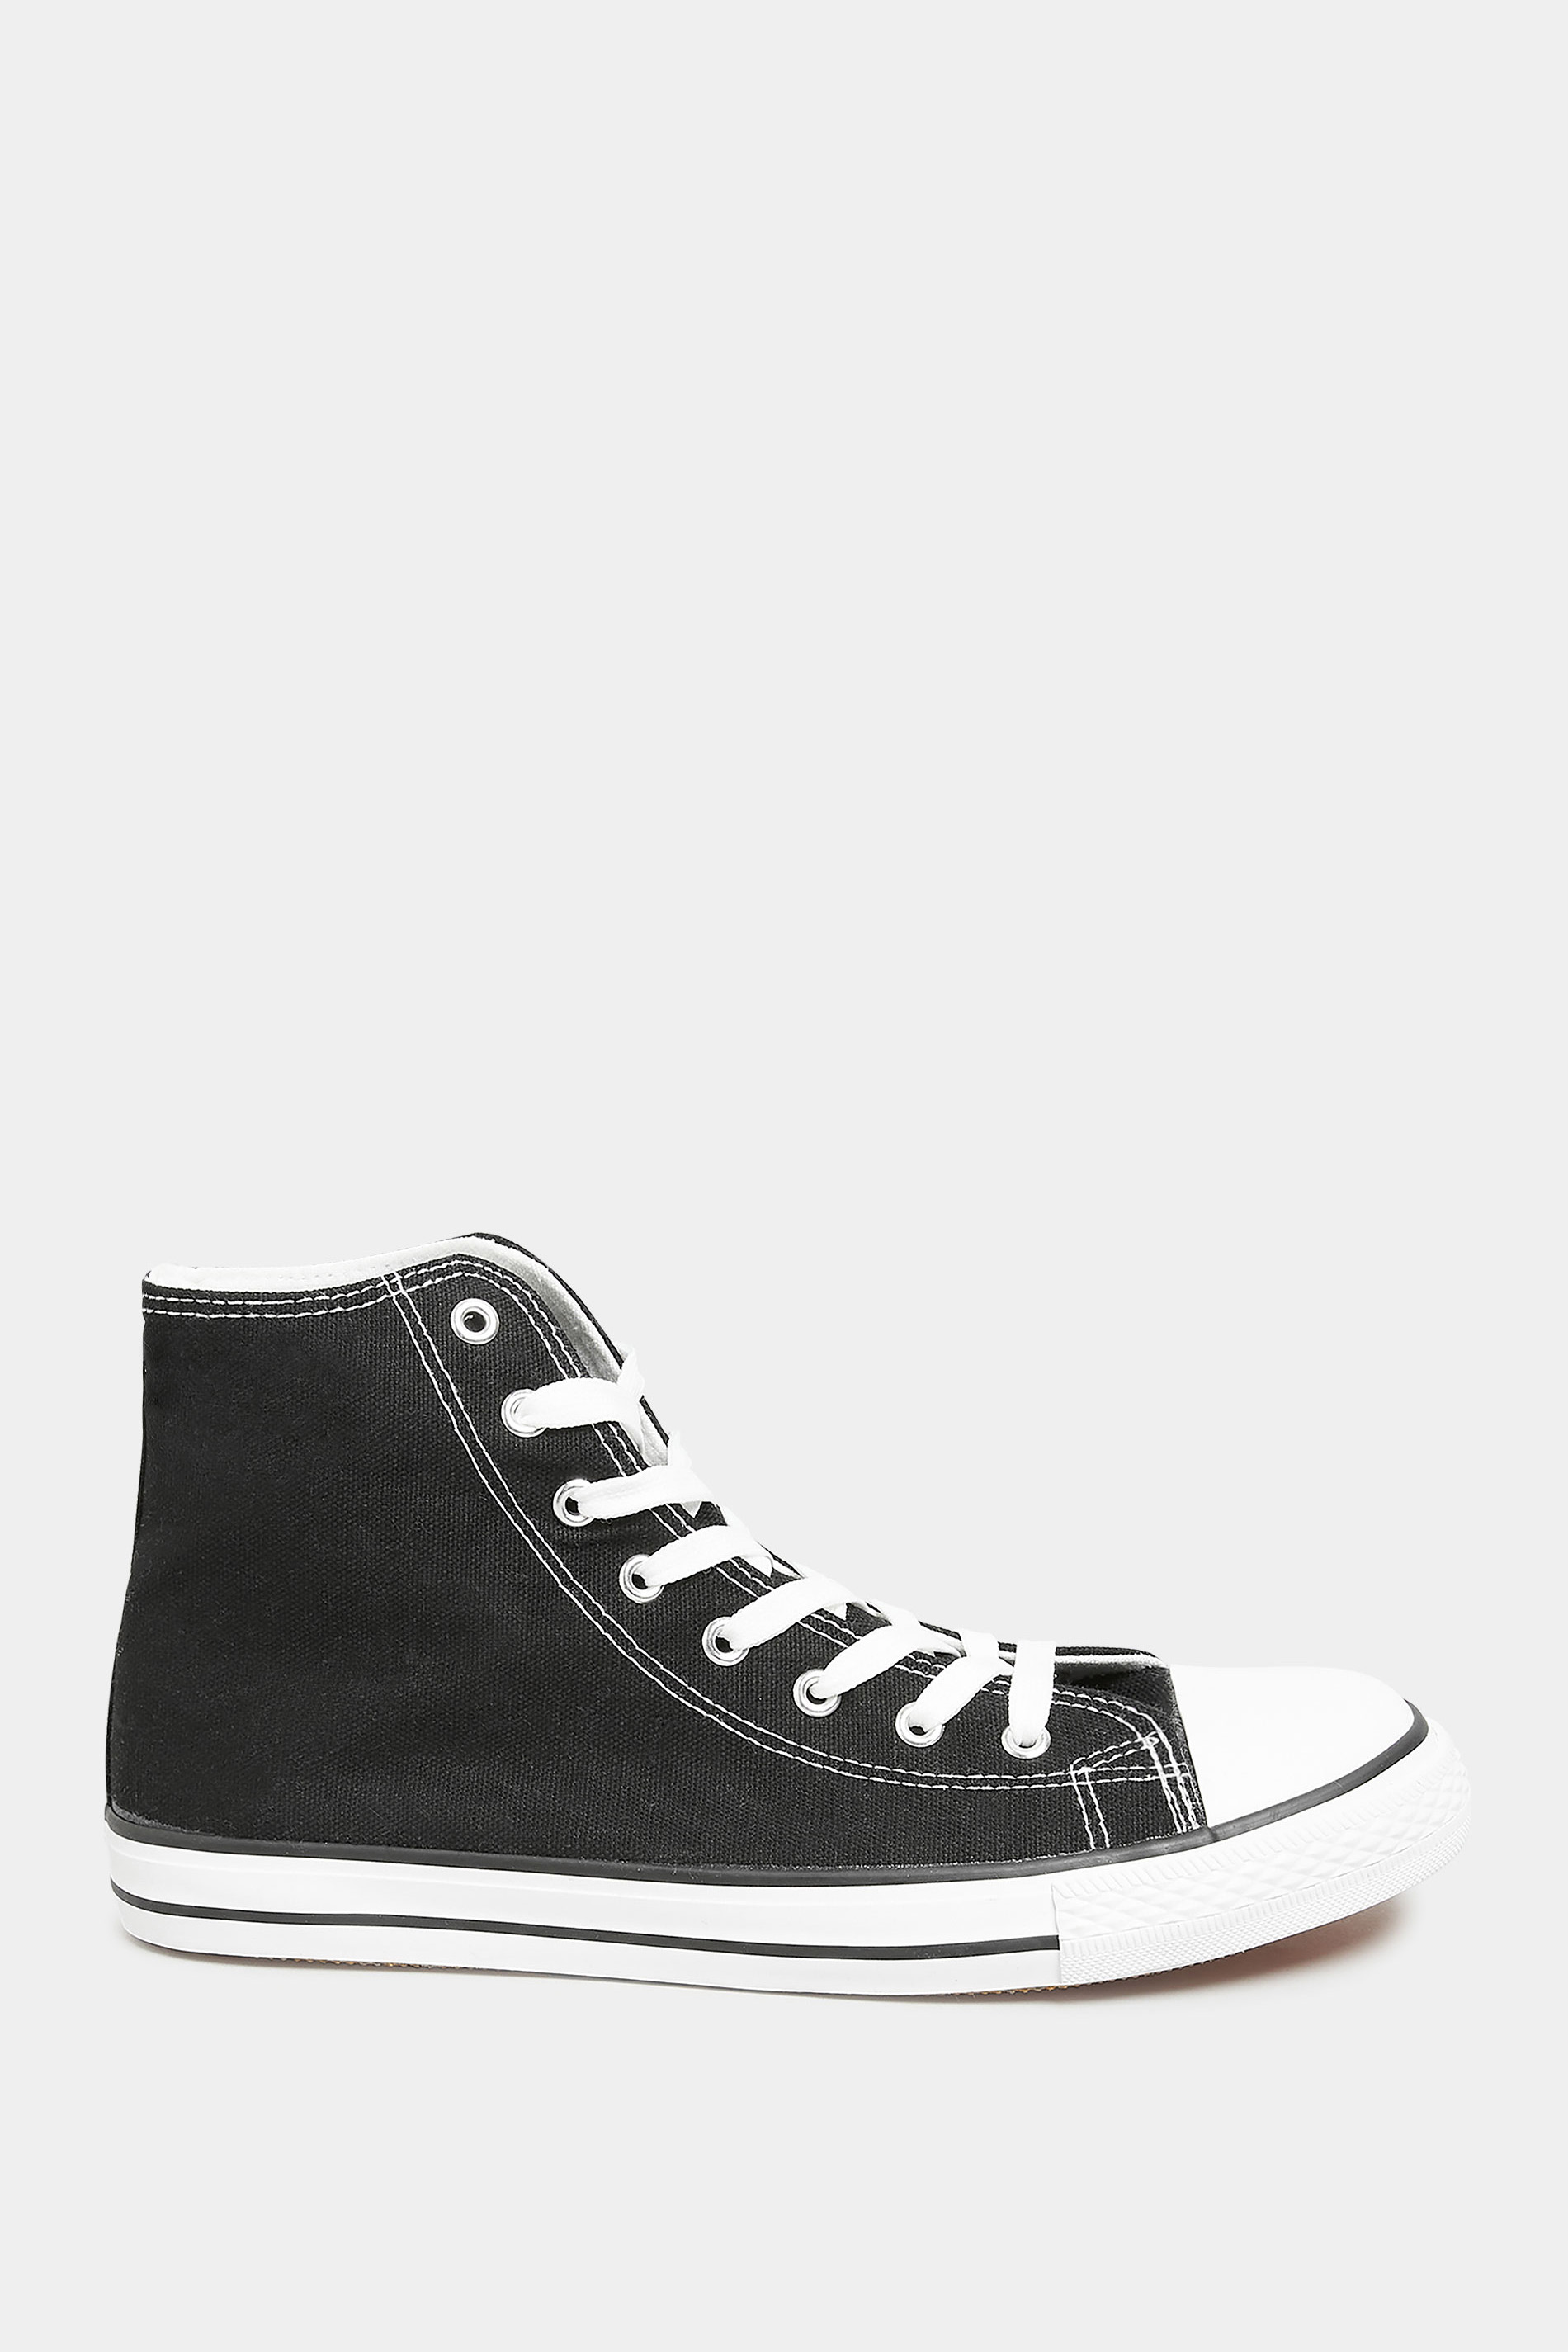 LTS Black Canvas High Top Trainers In Standard Fit | Long Tall Sally 3